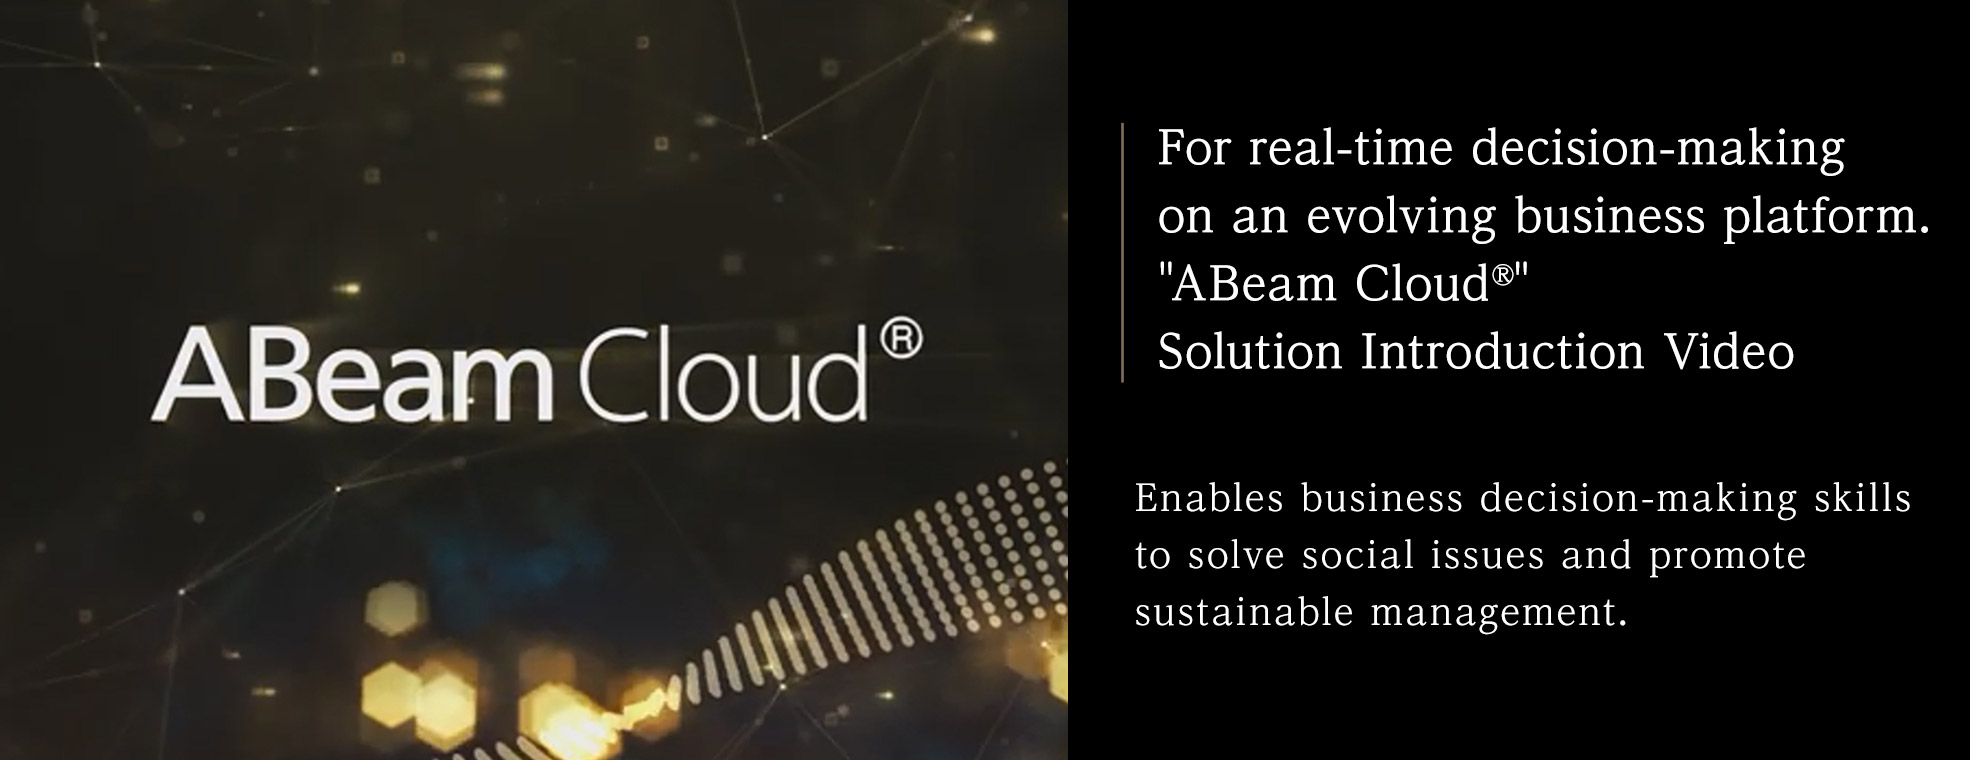 For real-time decision-making on an evolving business platform. ">>ABeam Cloud<<" Solution Introduction Video